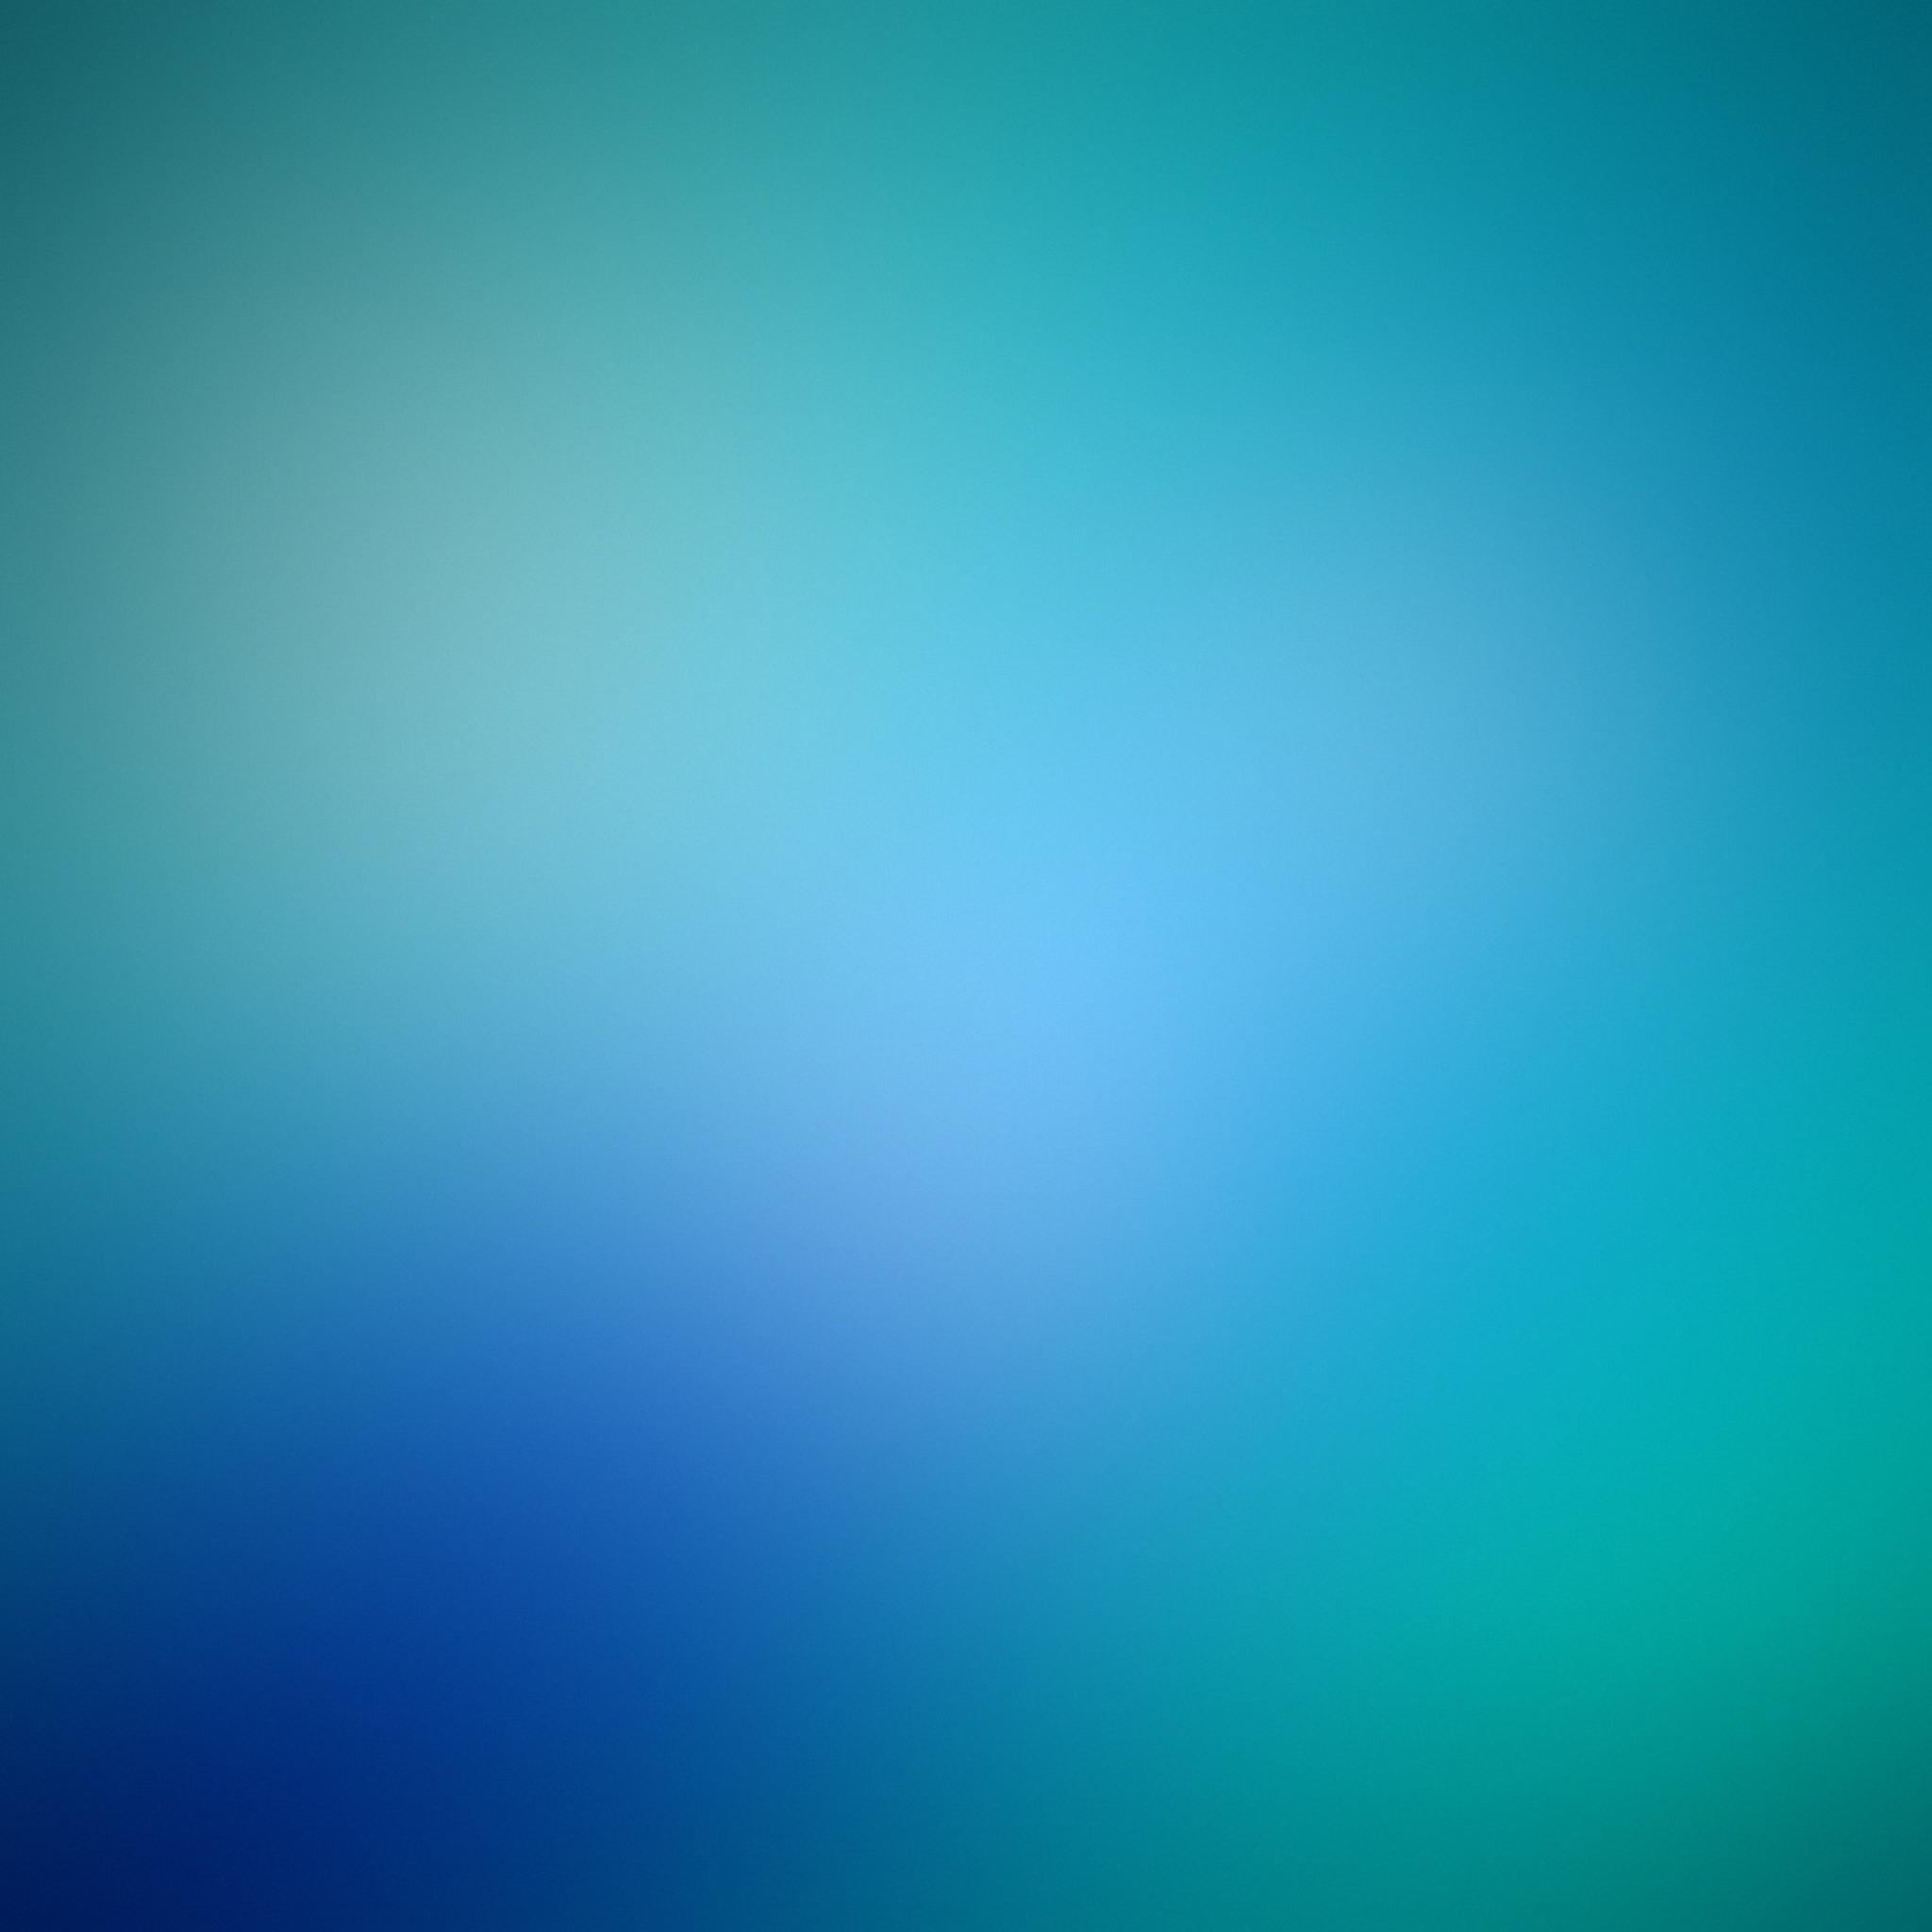 Solid Bright Blue Background C